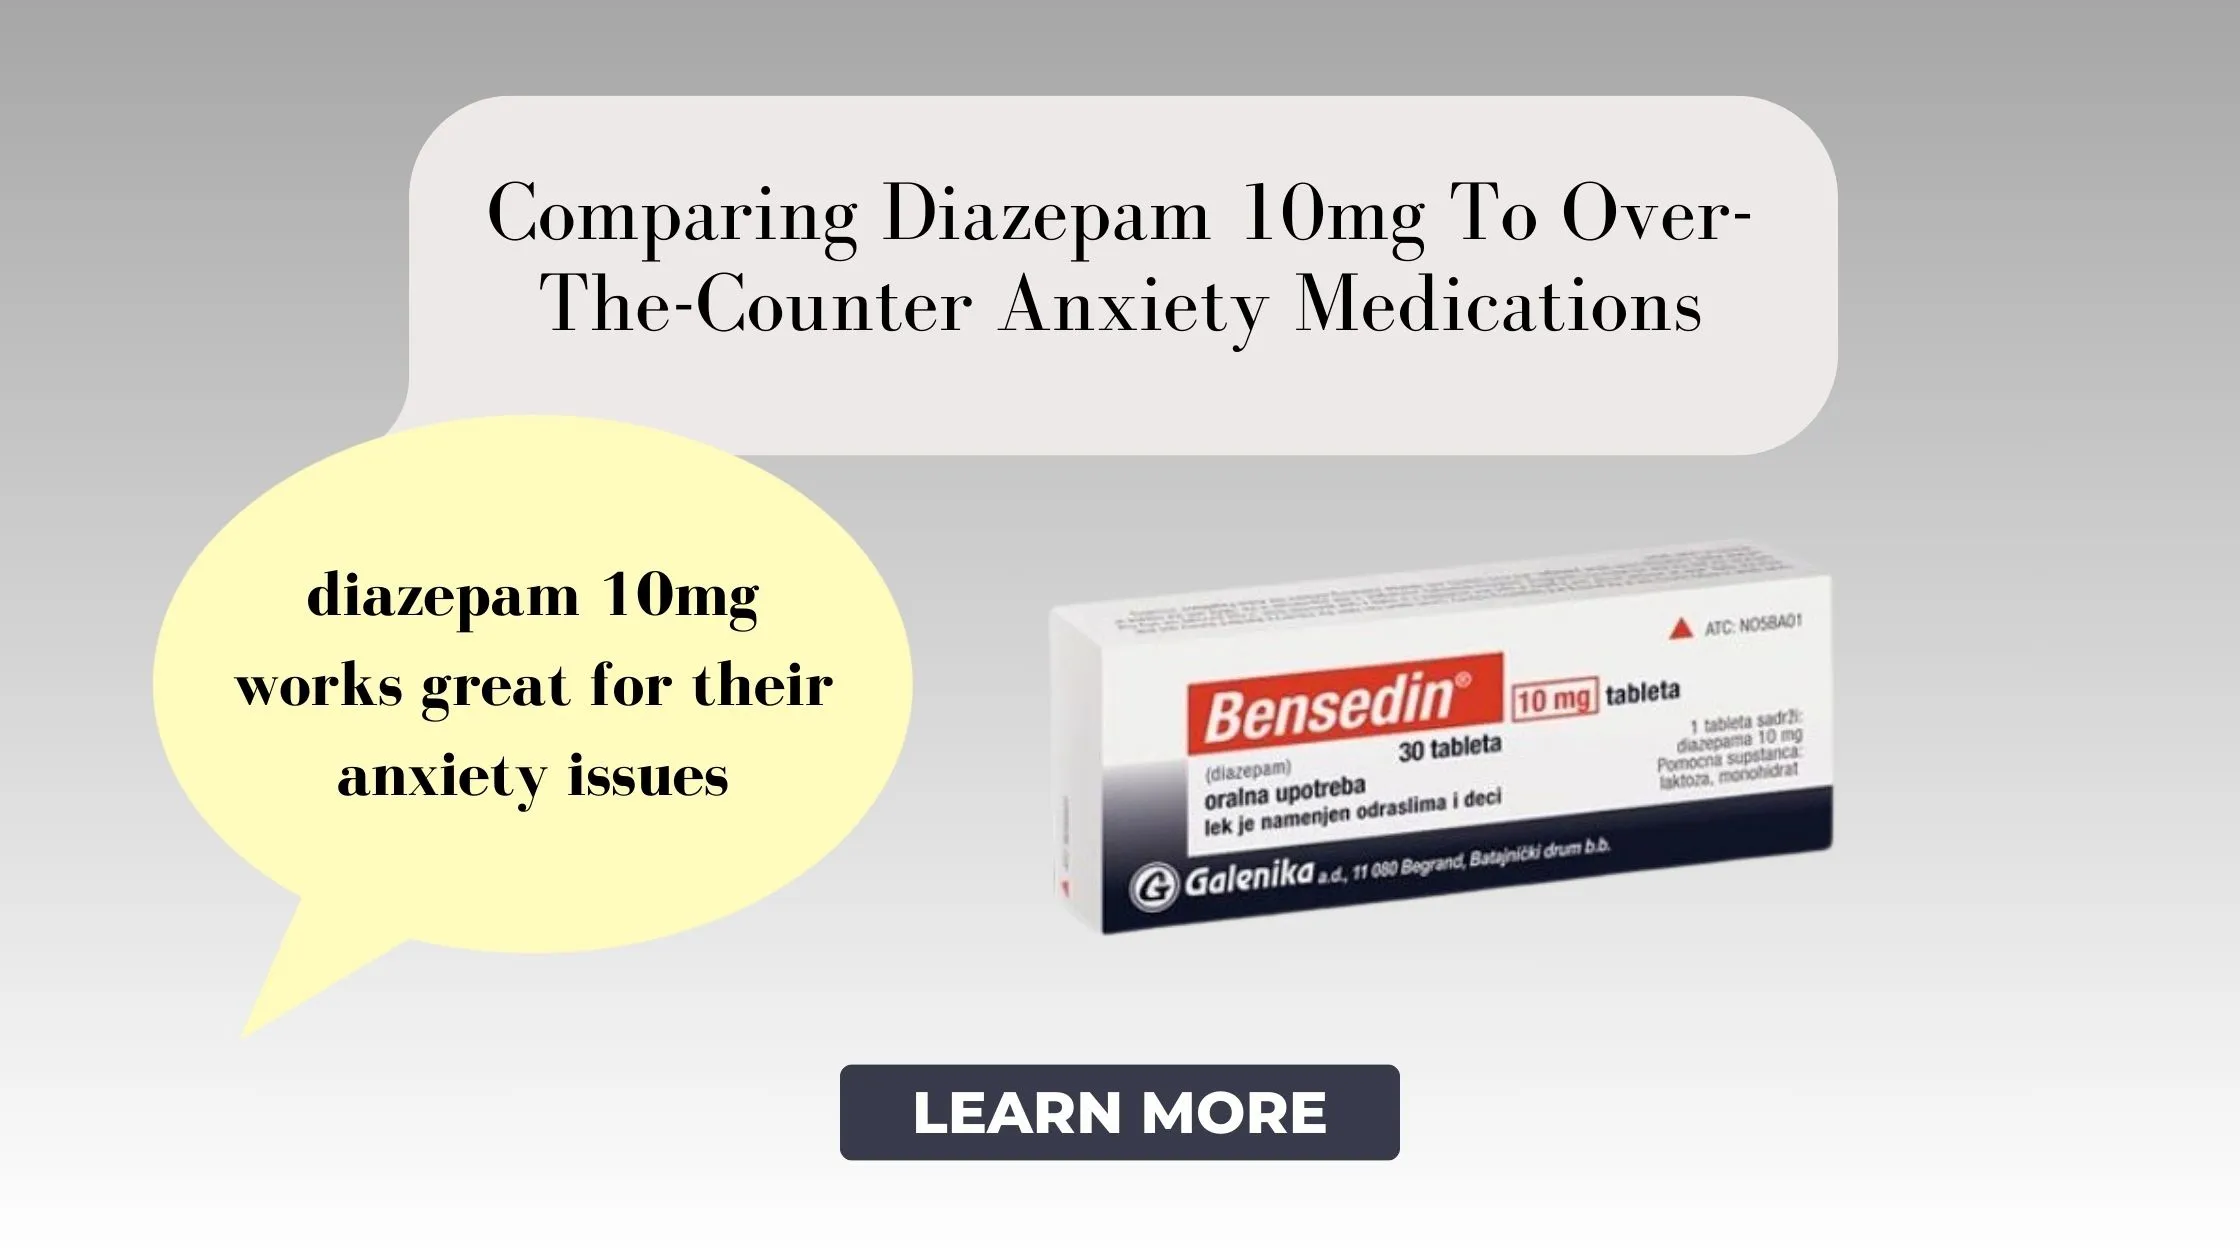 Comparing Diazepam 10mg To Over-The-Counter Anxiety Medications